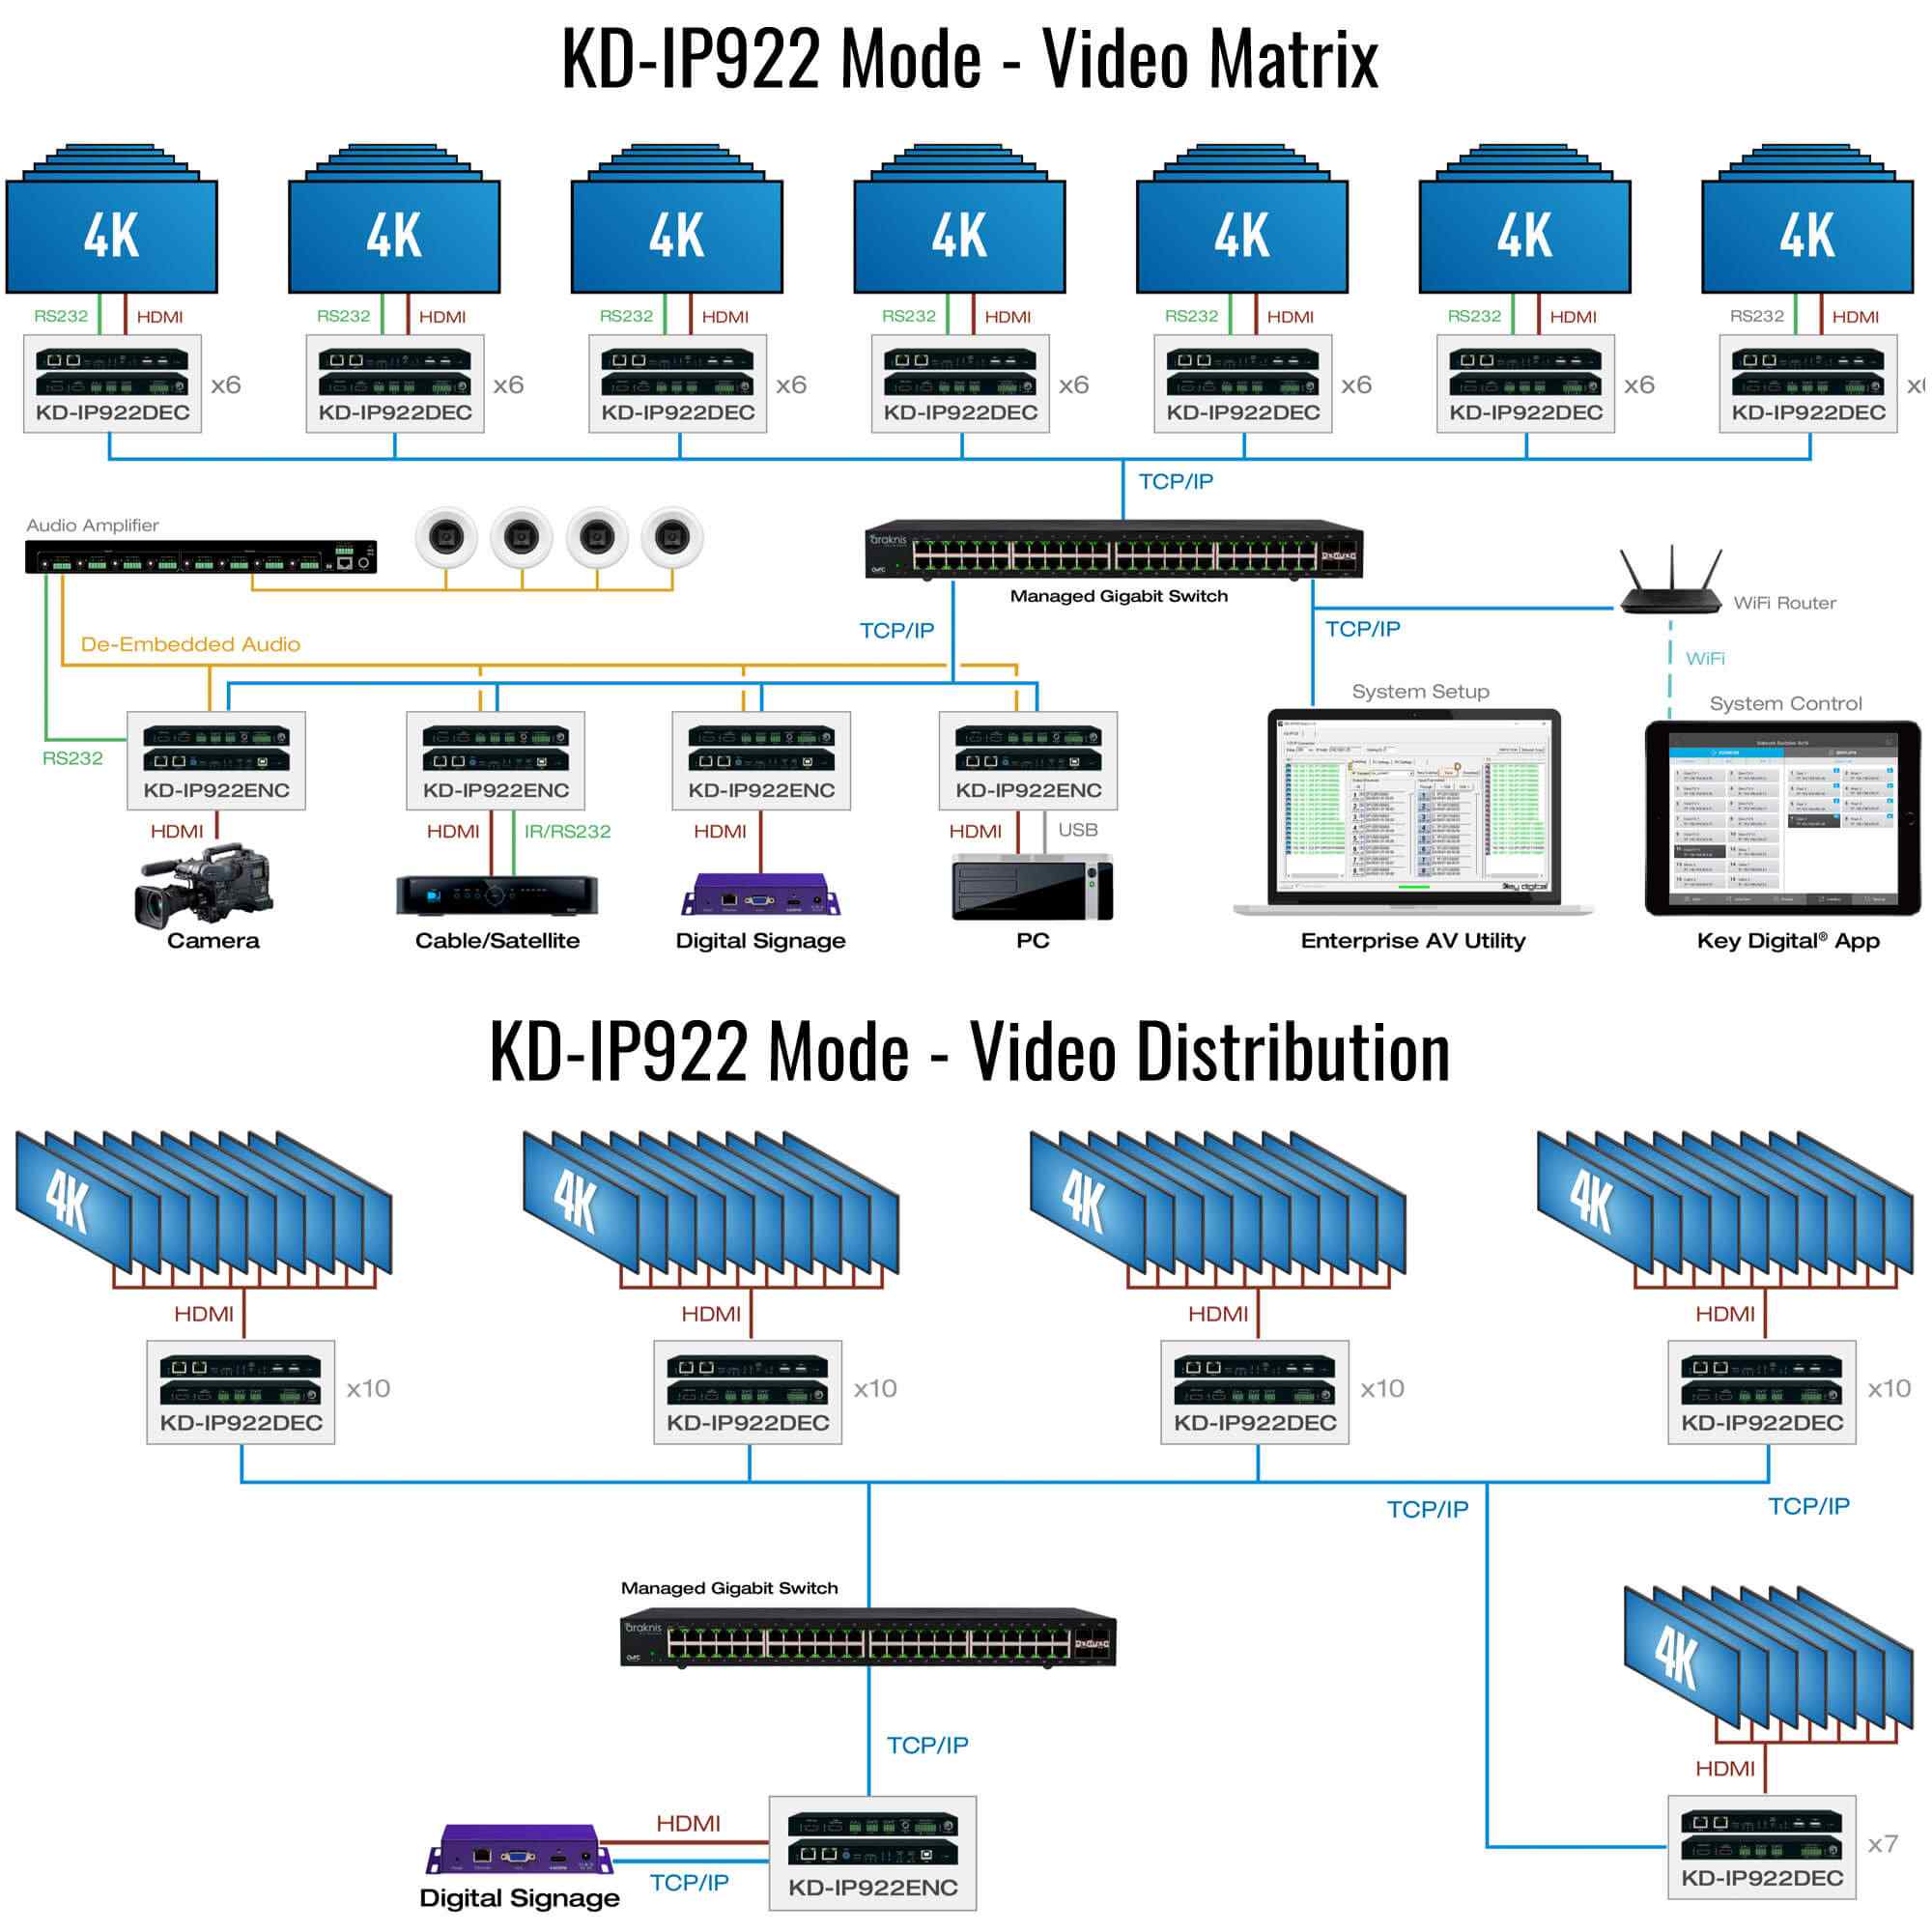 Thumbnail of Example Diagram showing the video switch and distribution mode of 4k over ip